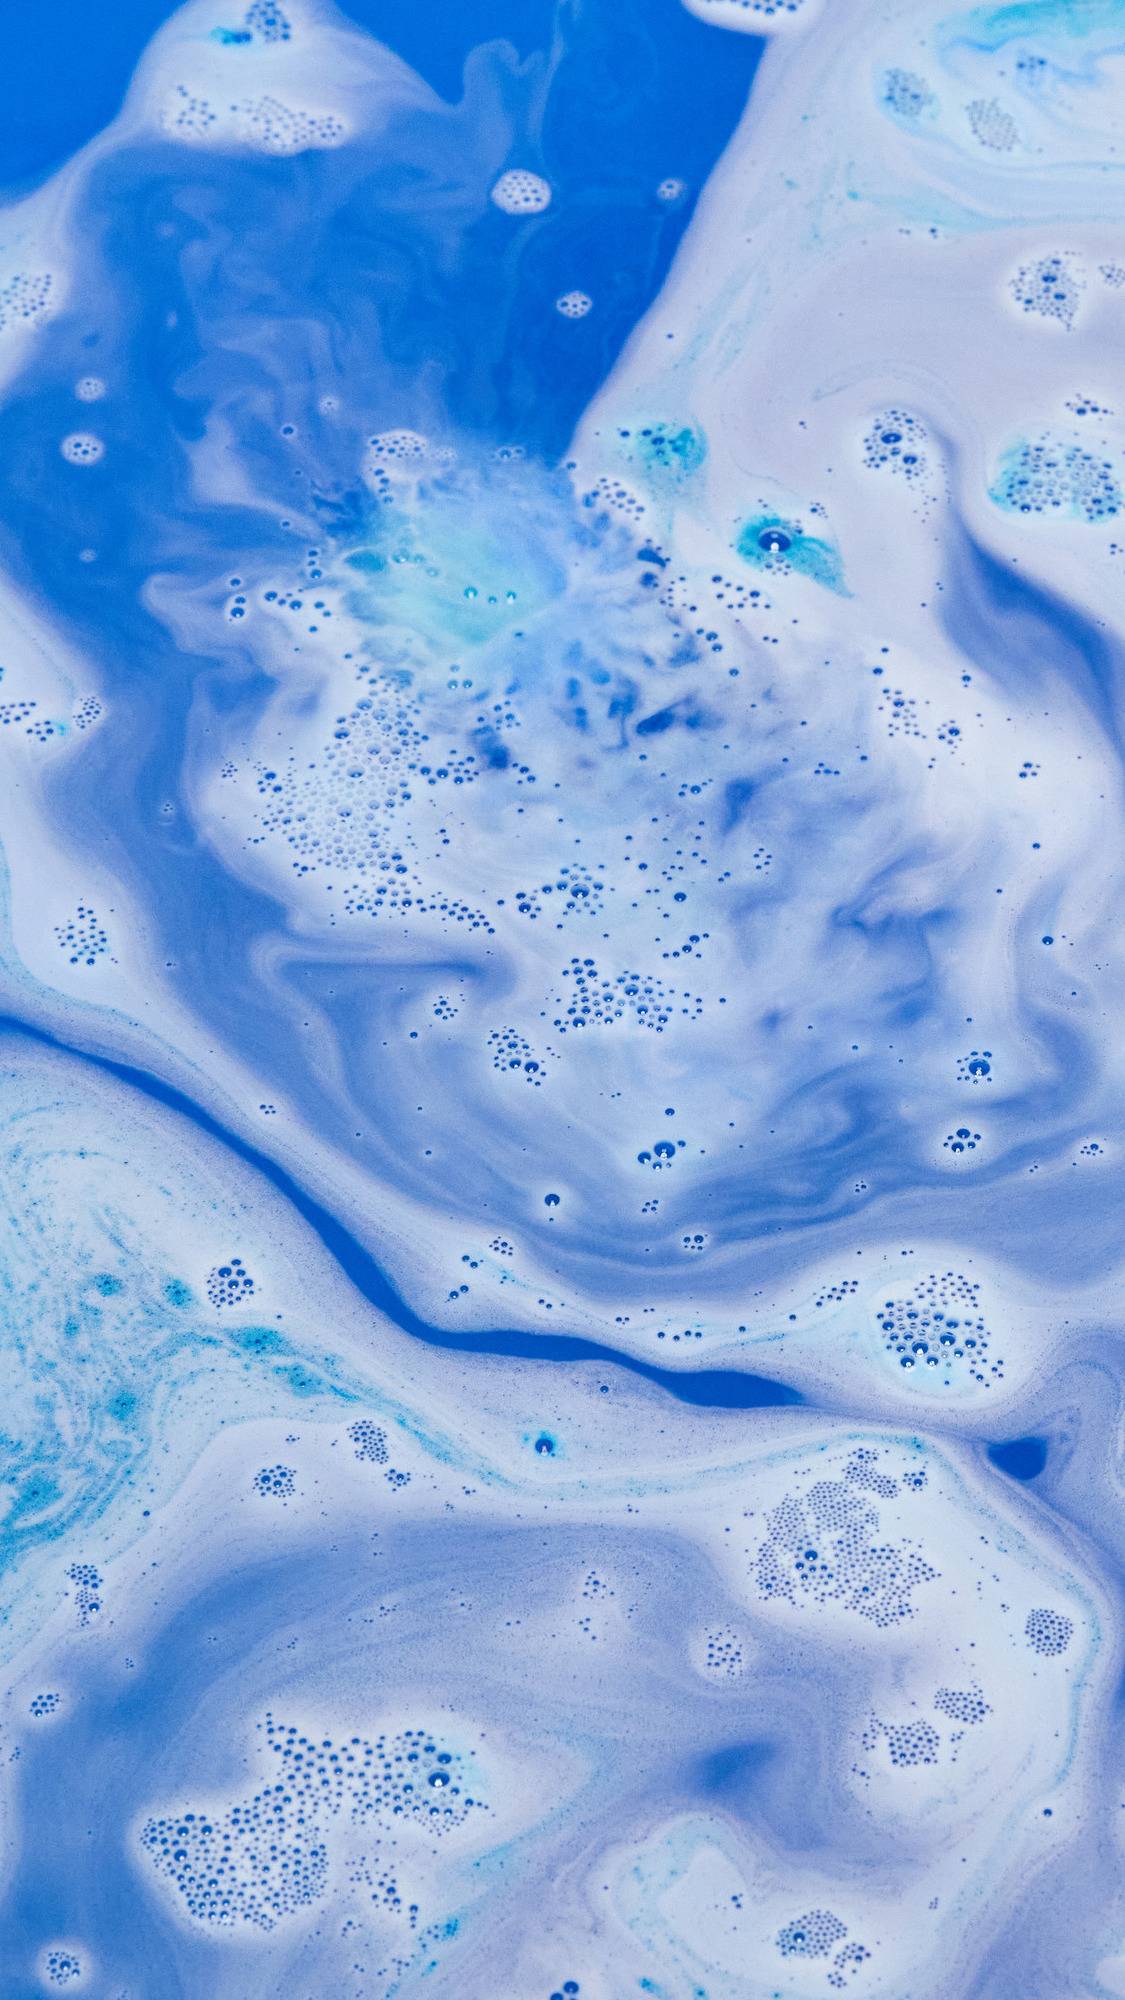 The Hexagon bath bomb is dissolving in the bath water leaving behind ocean-like swirls of deep blues and indigo with lightly foamy bubbles. 